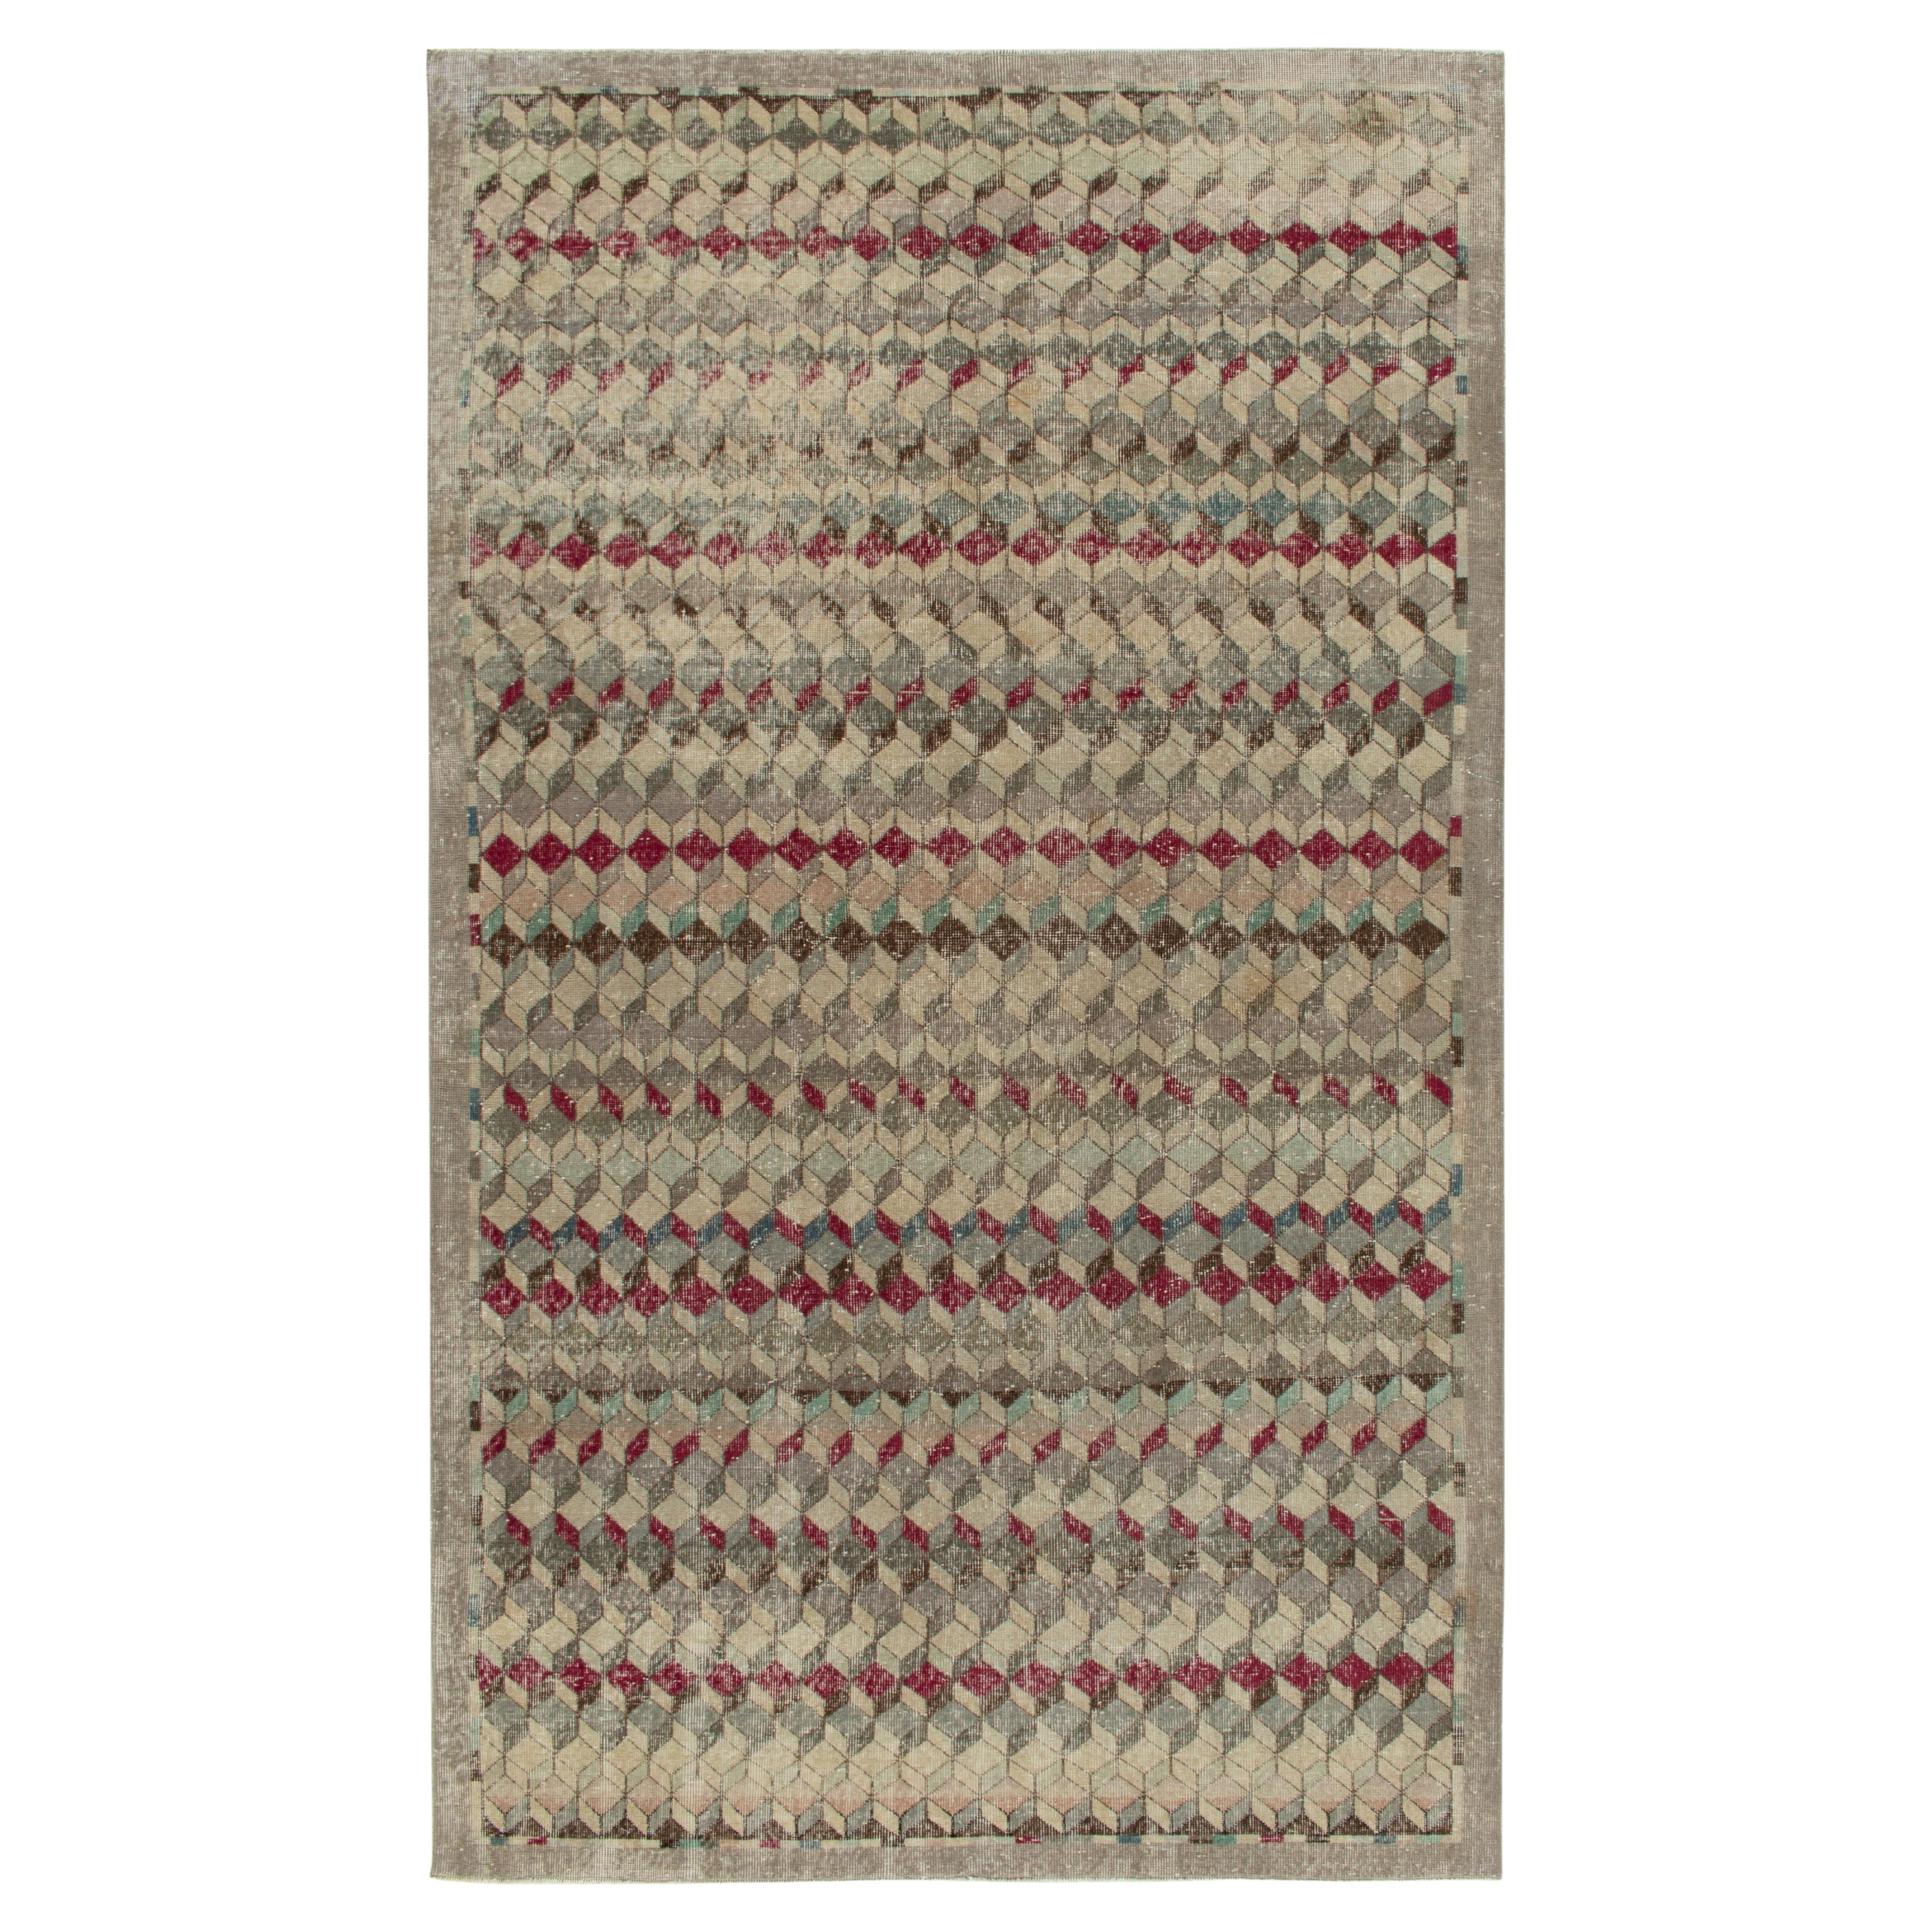 1960s Vintage Deco Rug in Greige, Green & Red Geometric Pattern by Rug & Kilim For Sale